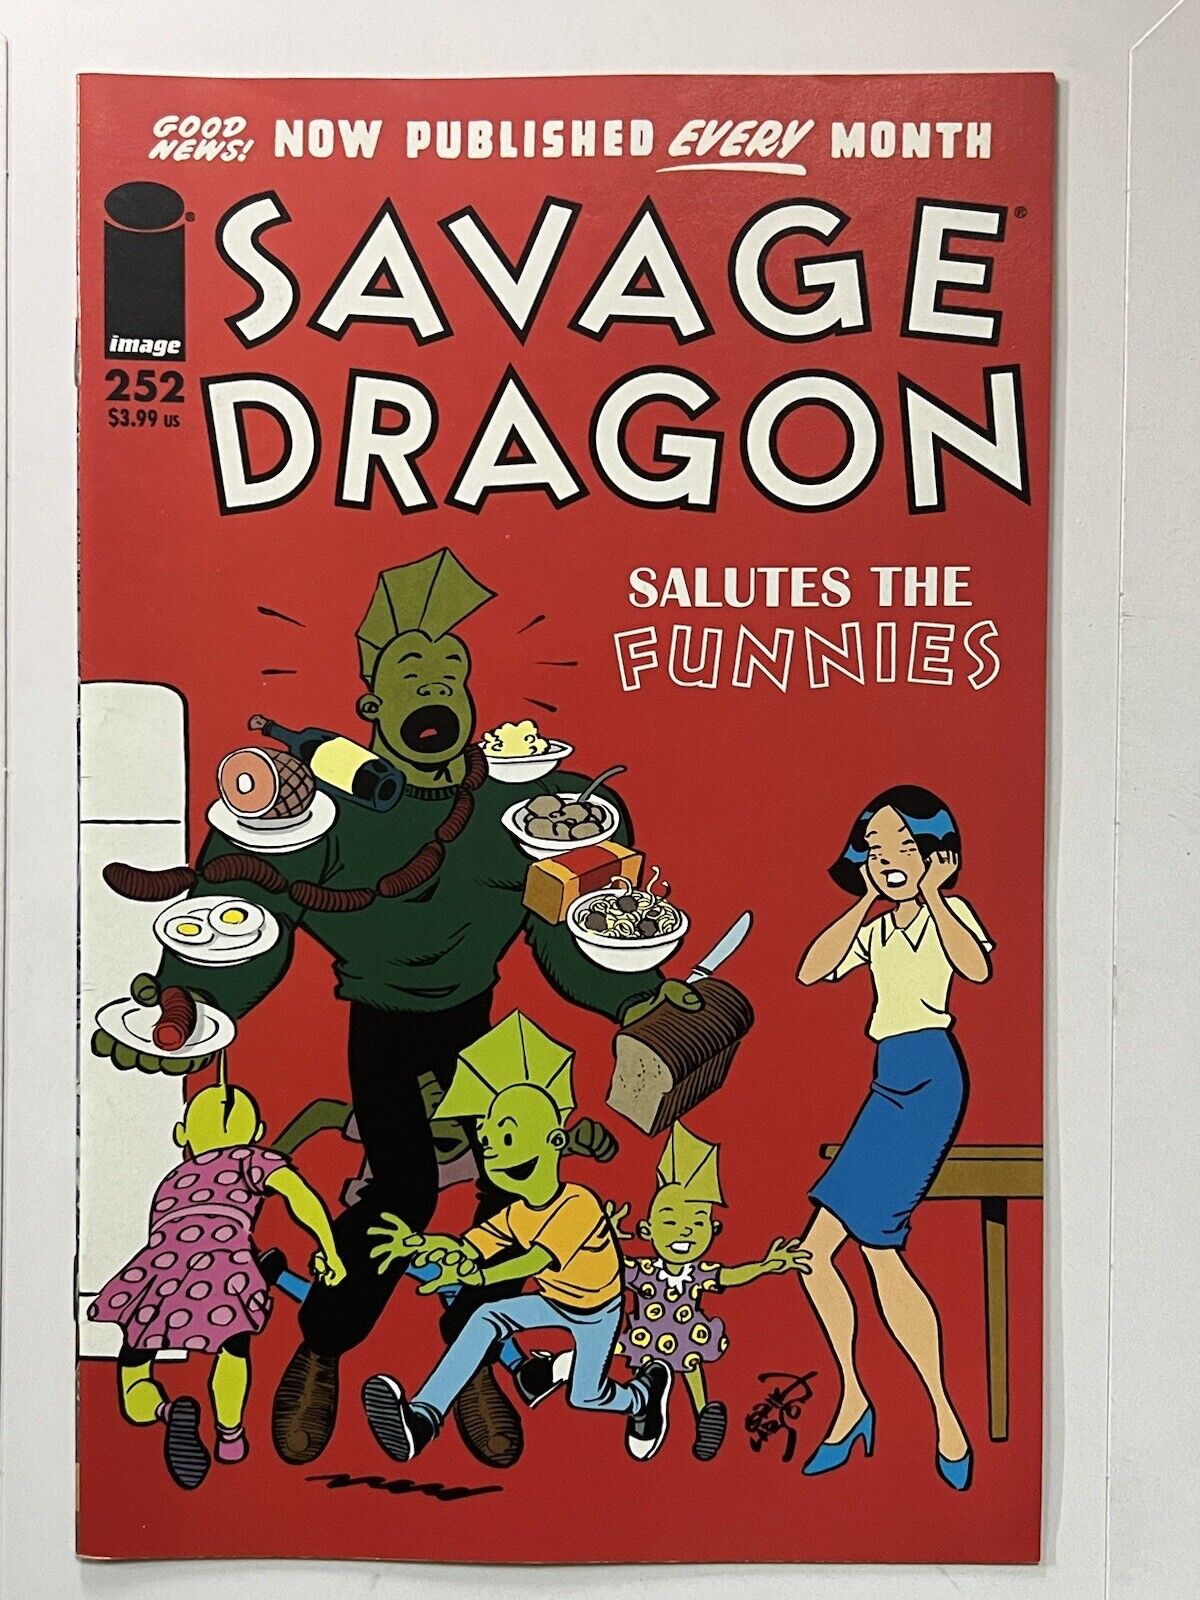 SAVAGE DRAGON #252 Salutes The Funnies/ Image Comics/ Spawn/ Department Of Truth